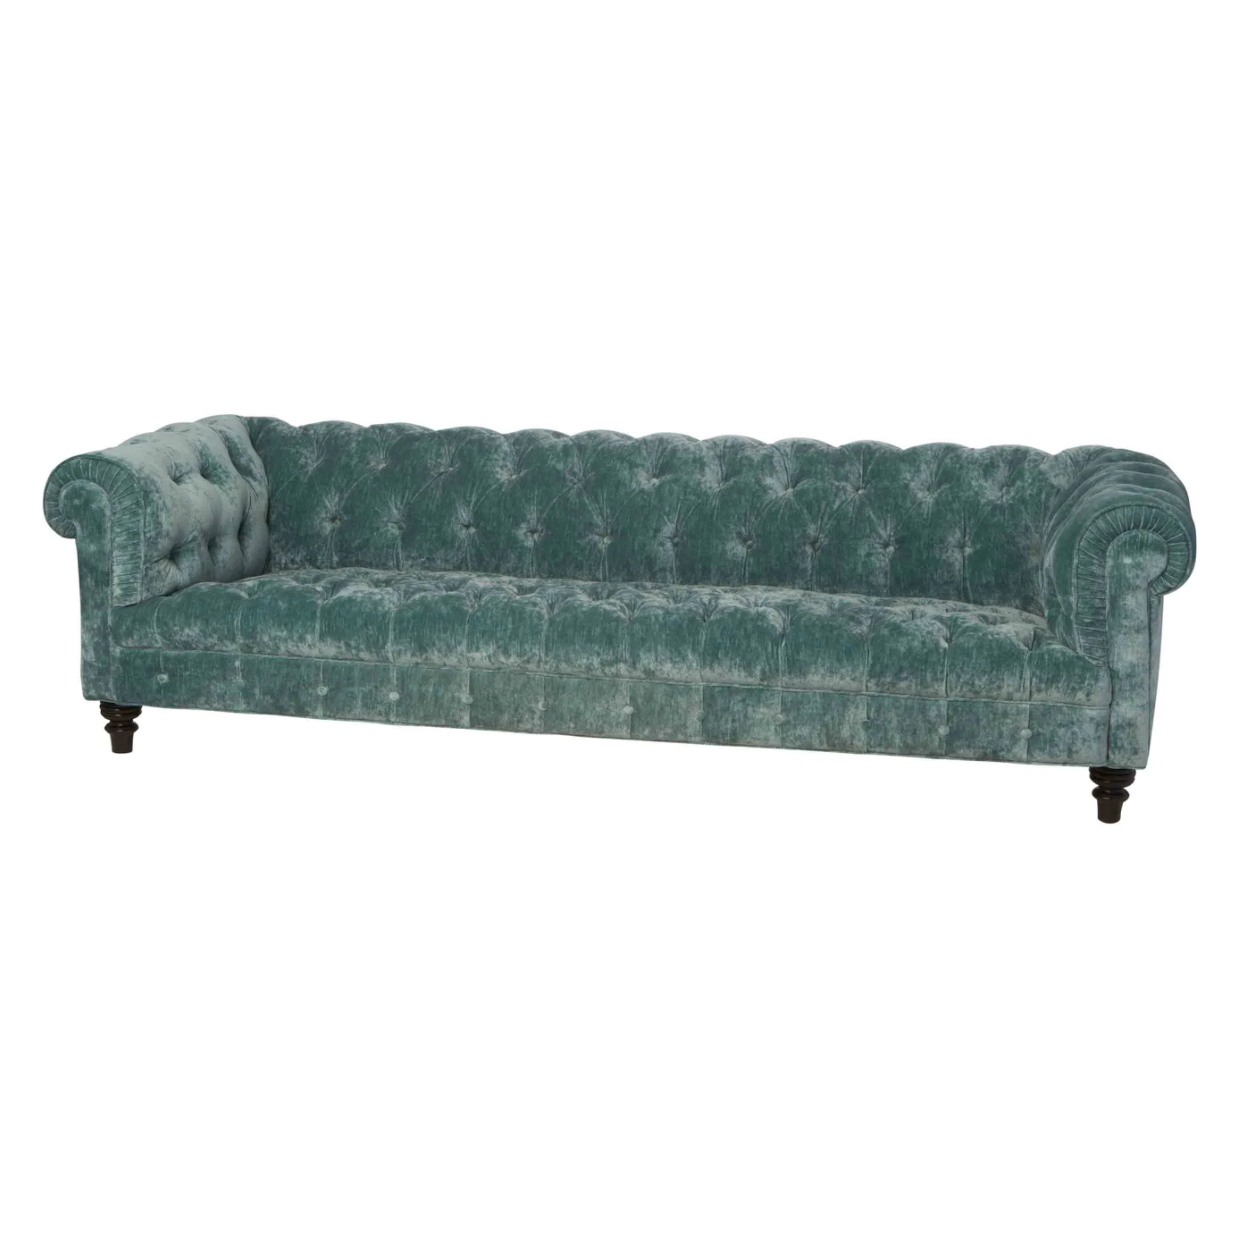 This Brook Sofa - John Derian by Cisco Home is traditional and inviting. A large, comfortable sofa to gather the whole family around for years to come.  Overall: 98"w x 38"d x 27"h